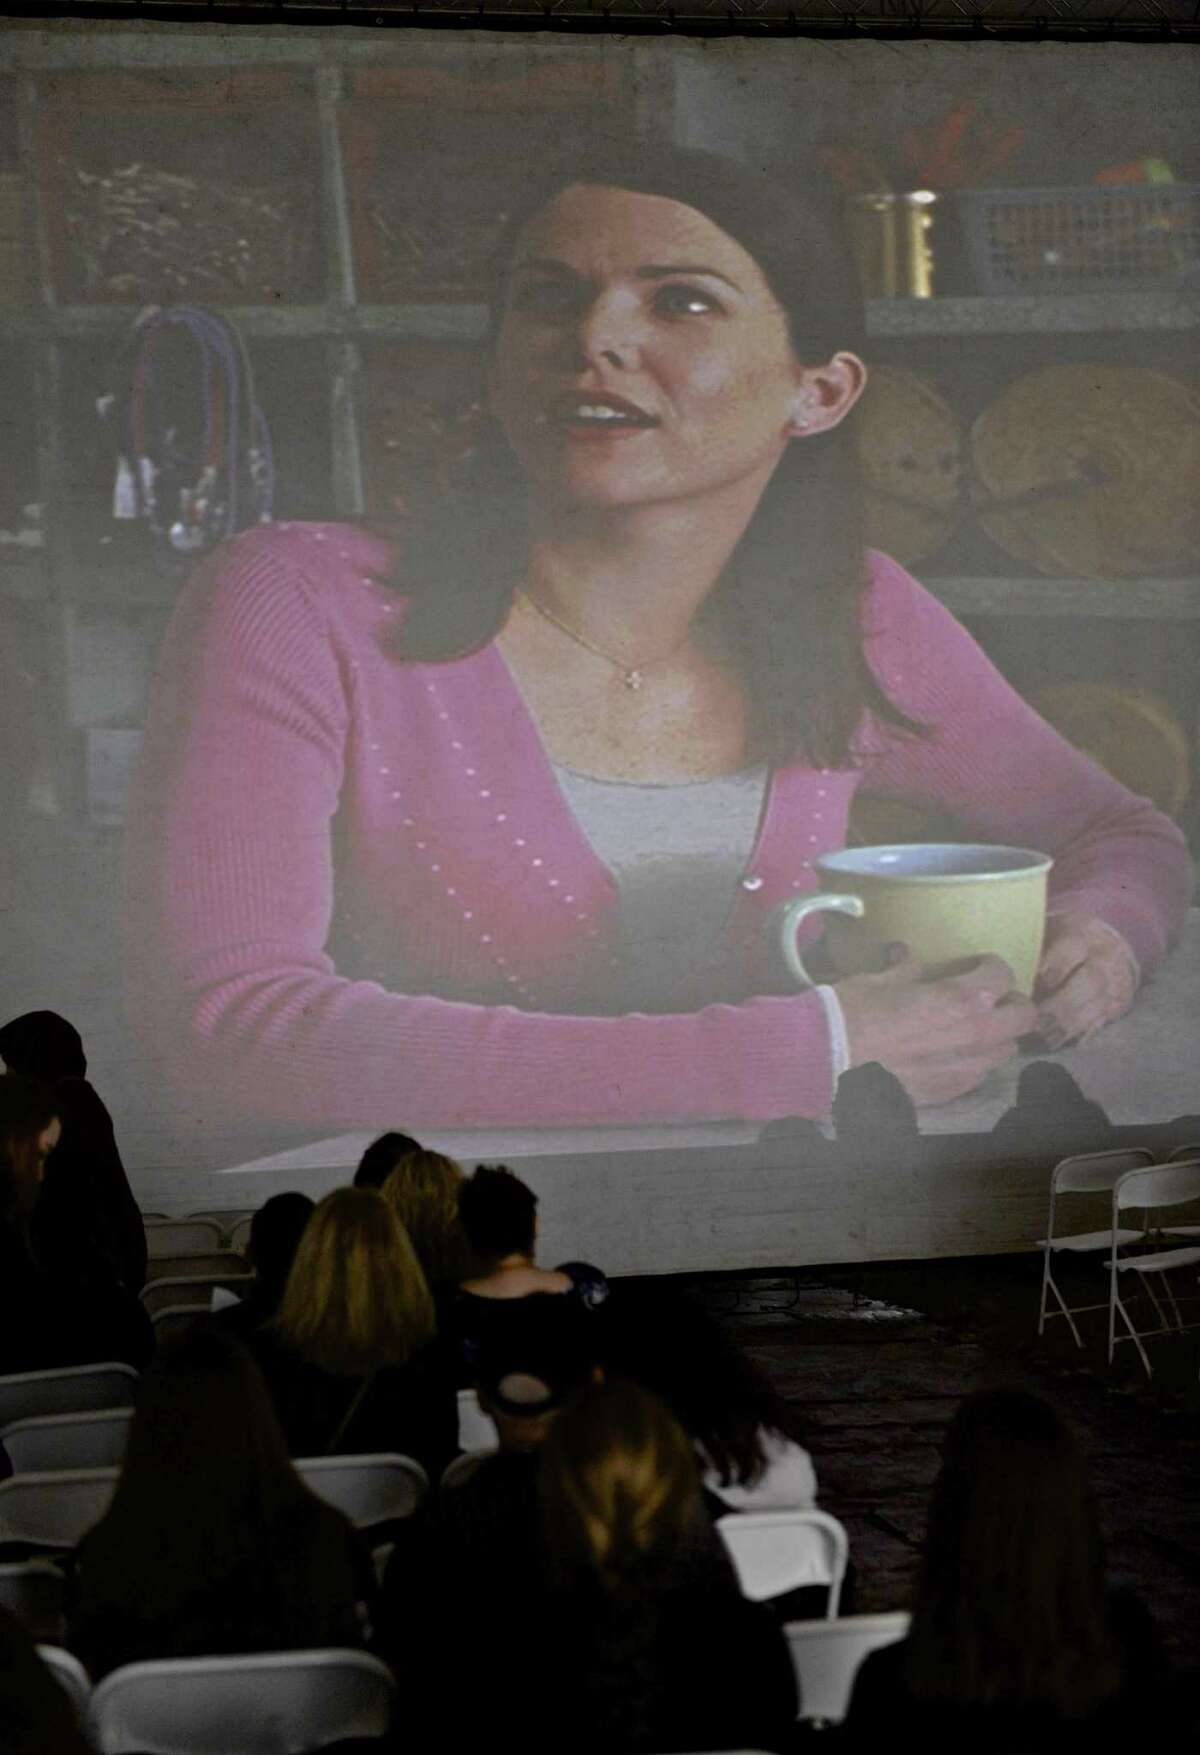 Fans watch the pilot for the "Gilmore Girls" tv show at the Gilmore Girls Fan Fest in Washington Depot, Conn, on Friday, October 21, 2016. Title character Lorelai Gilmore, played by actress Lauren Graham is on the screen.